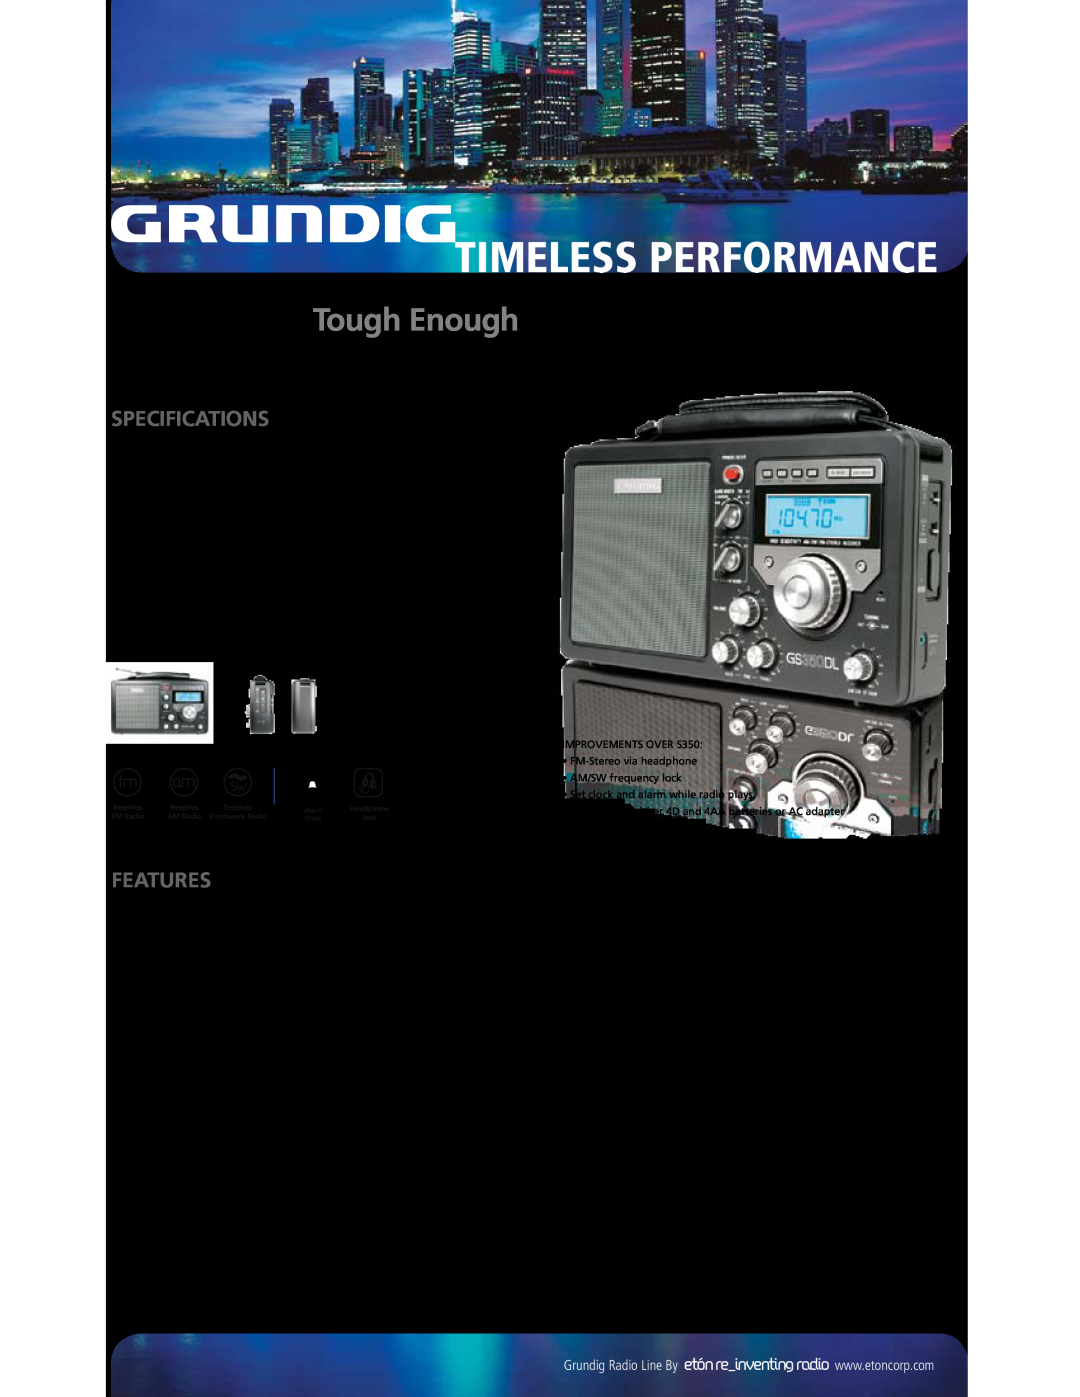 Grundig specifications Timeless Performance, GS350DL Tough Enough, Specifications, Features, AM/FM/Shortwave Radio 